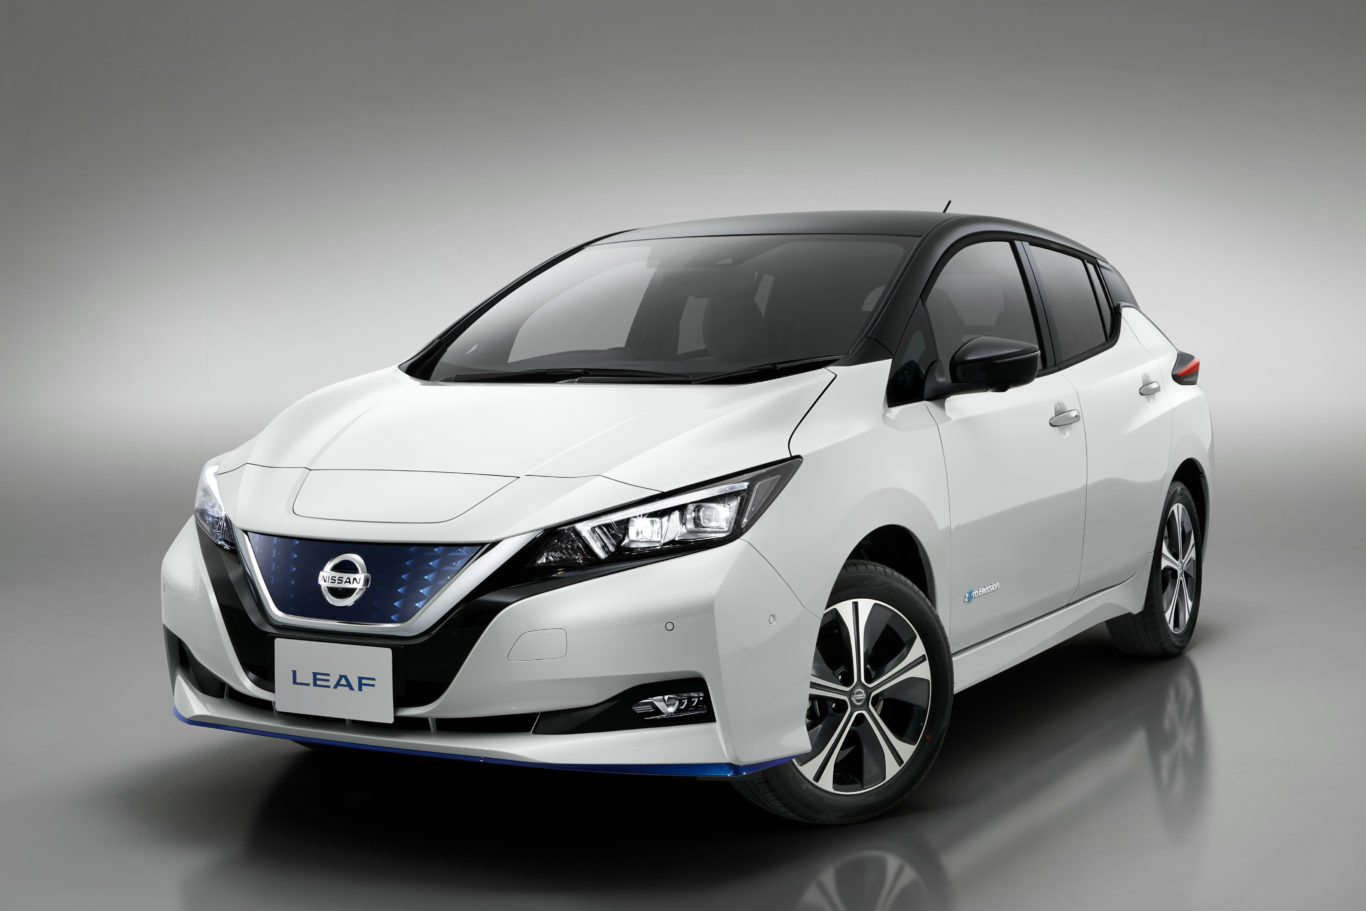 The Nissan Leaf is one of the best-known electric cars